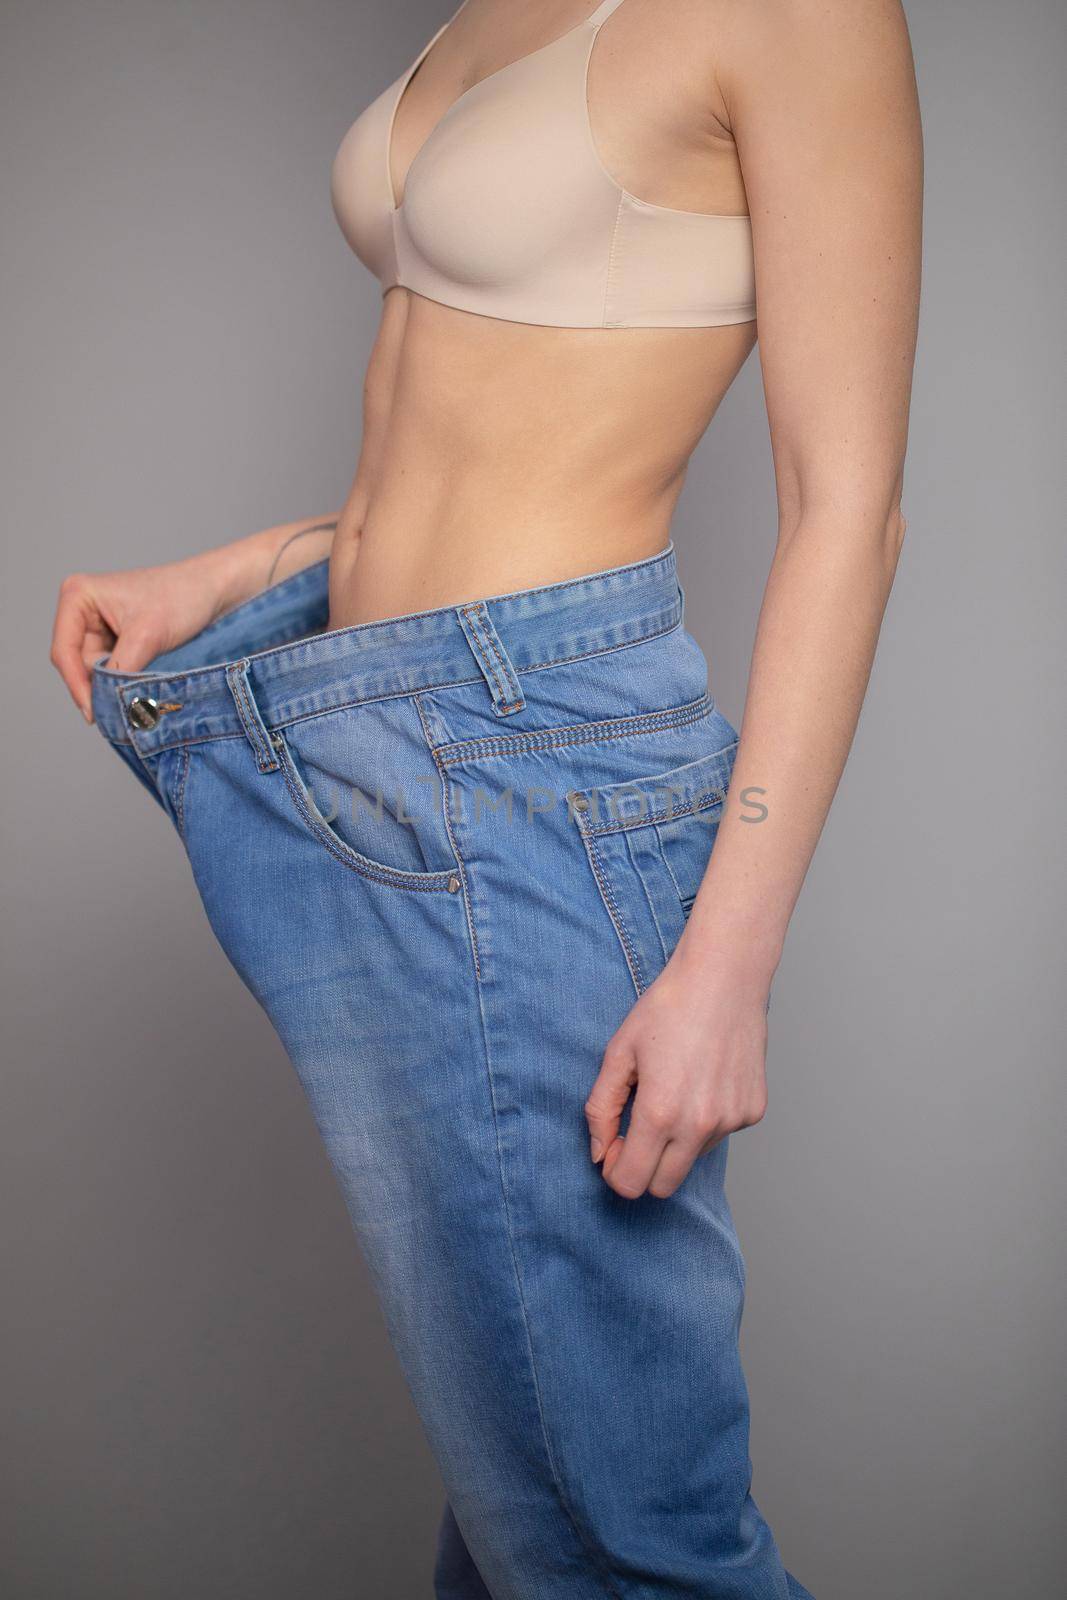 Weight Loss and Body Image Concept. Young Woman Shows her Weight Loss and Wearing Her Old Jeans. Slim Girl in Big Jeans Showing How She Was Losing Weight When She Started Eating Healthy Food